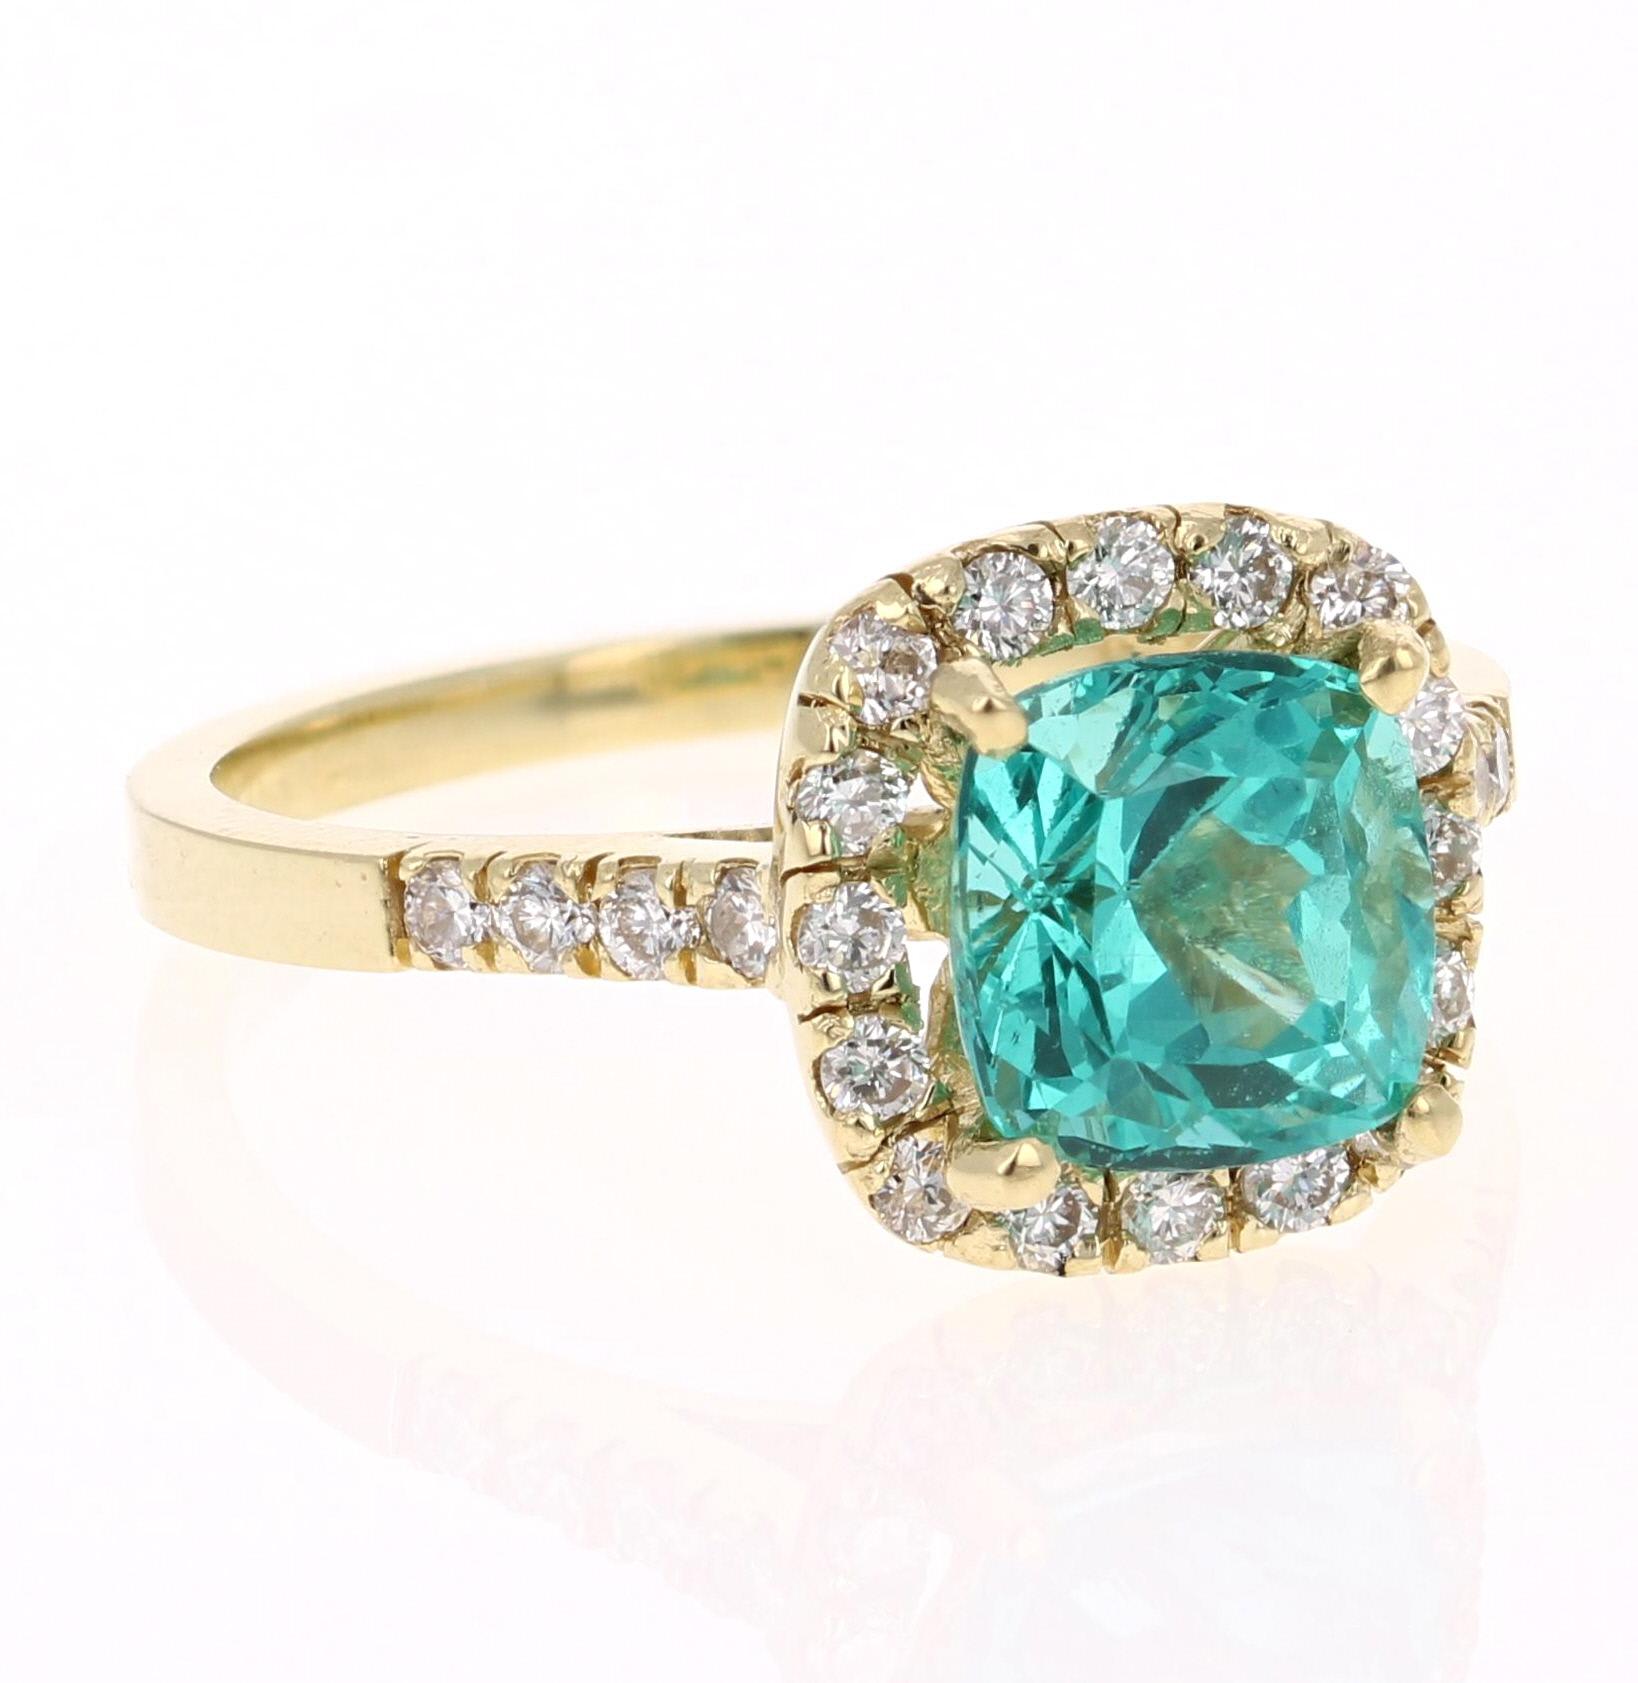 Classic and beautifully designed Apatite and Diamond Ring!  

Apatites are found in various places around the world including Myanmar, Kenya, India, Brazil, Sri Lanka, Norway, Mexico and the USA. The sea blue color of Apatite is considered top grade